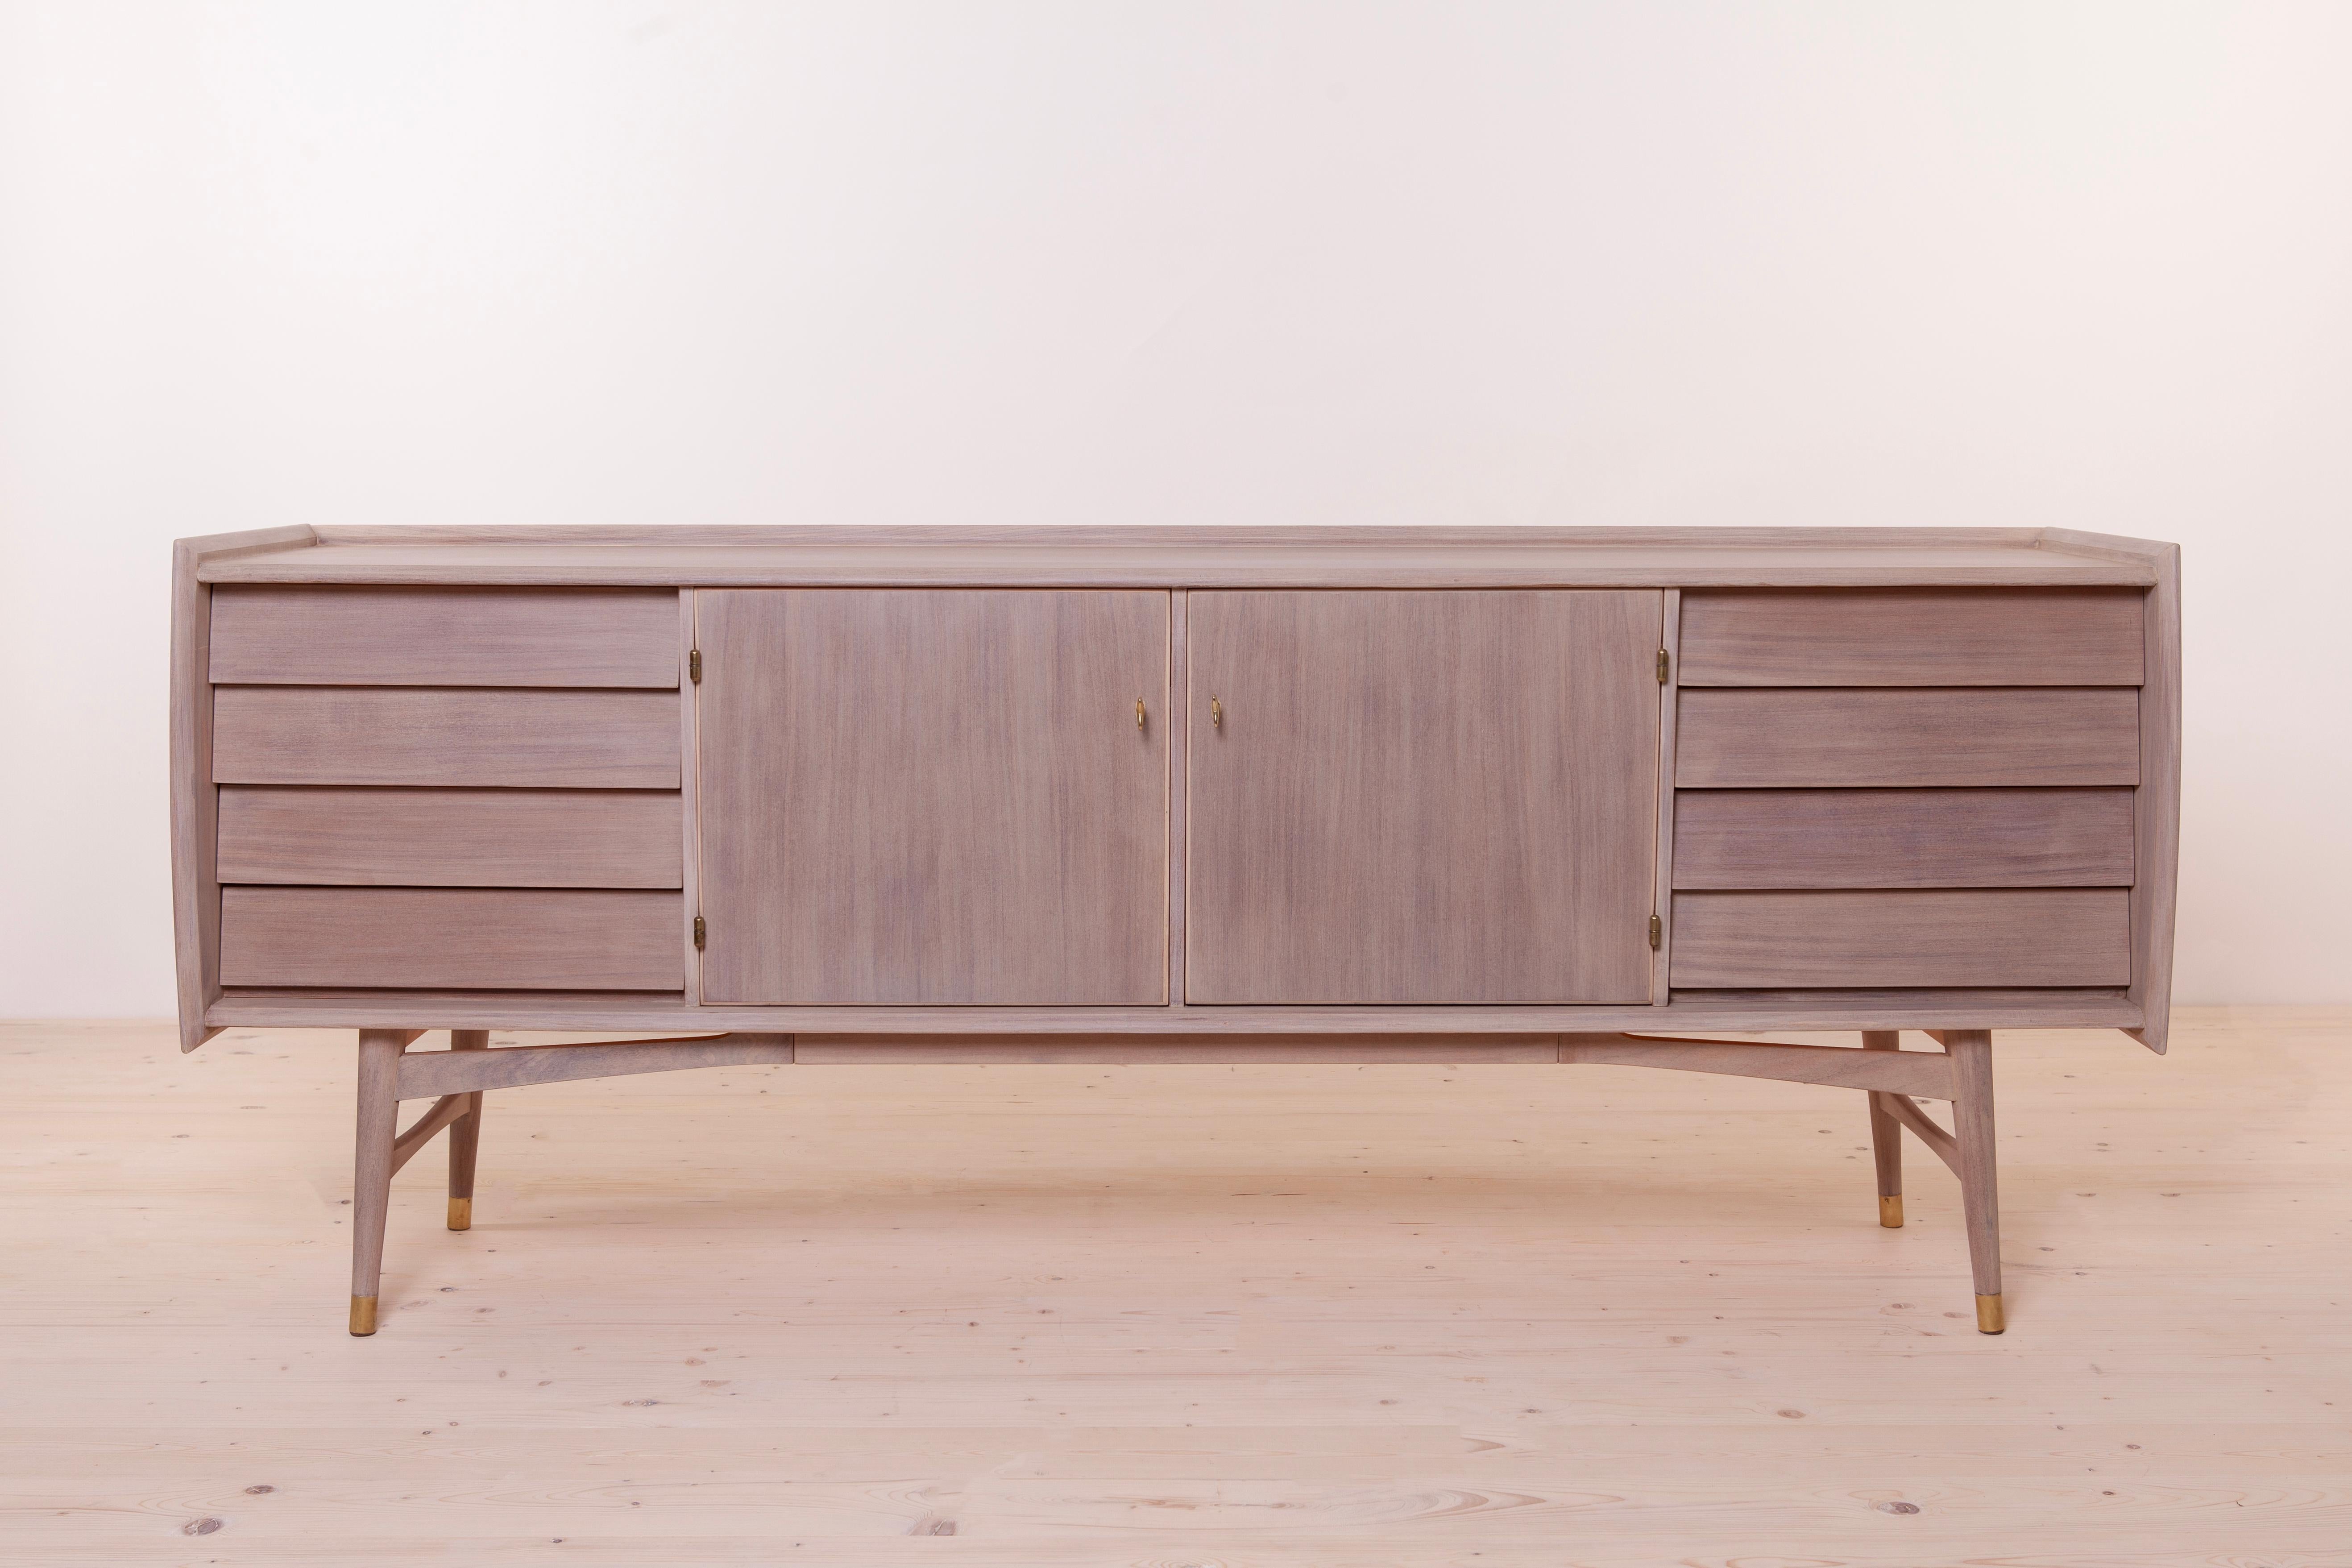 Introducing the sideboard designed by Sven Andersen – an exquisite masterpiece that seamlessly blends the timeless elegance of Scandinavian Modern design with the iconic flair of Mid-Century Modern aesthetics, transporting you straight into the chic